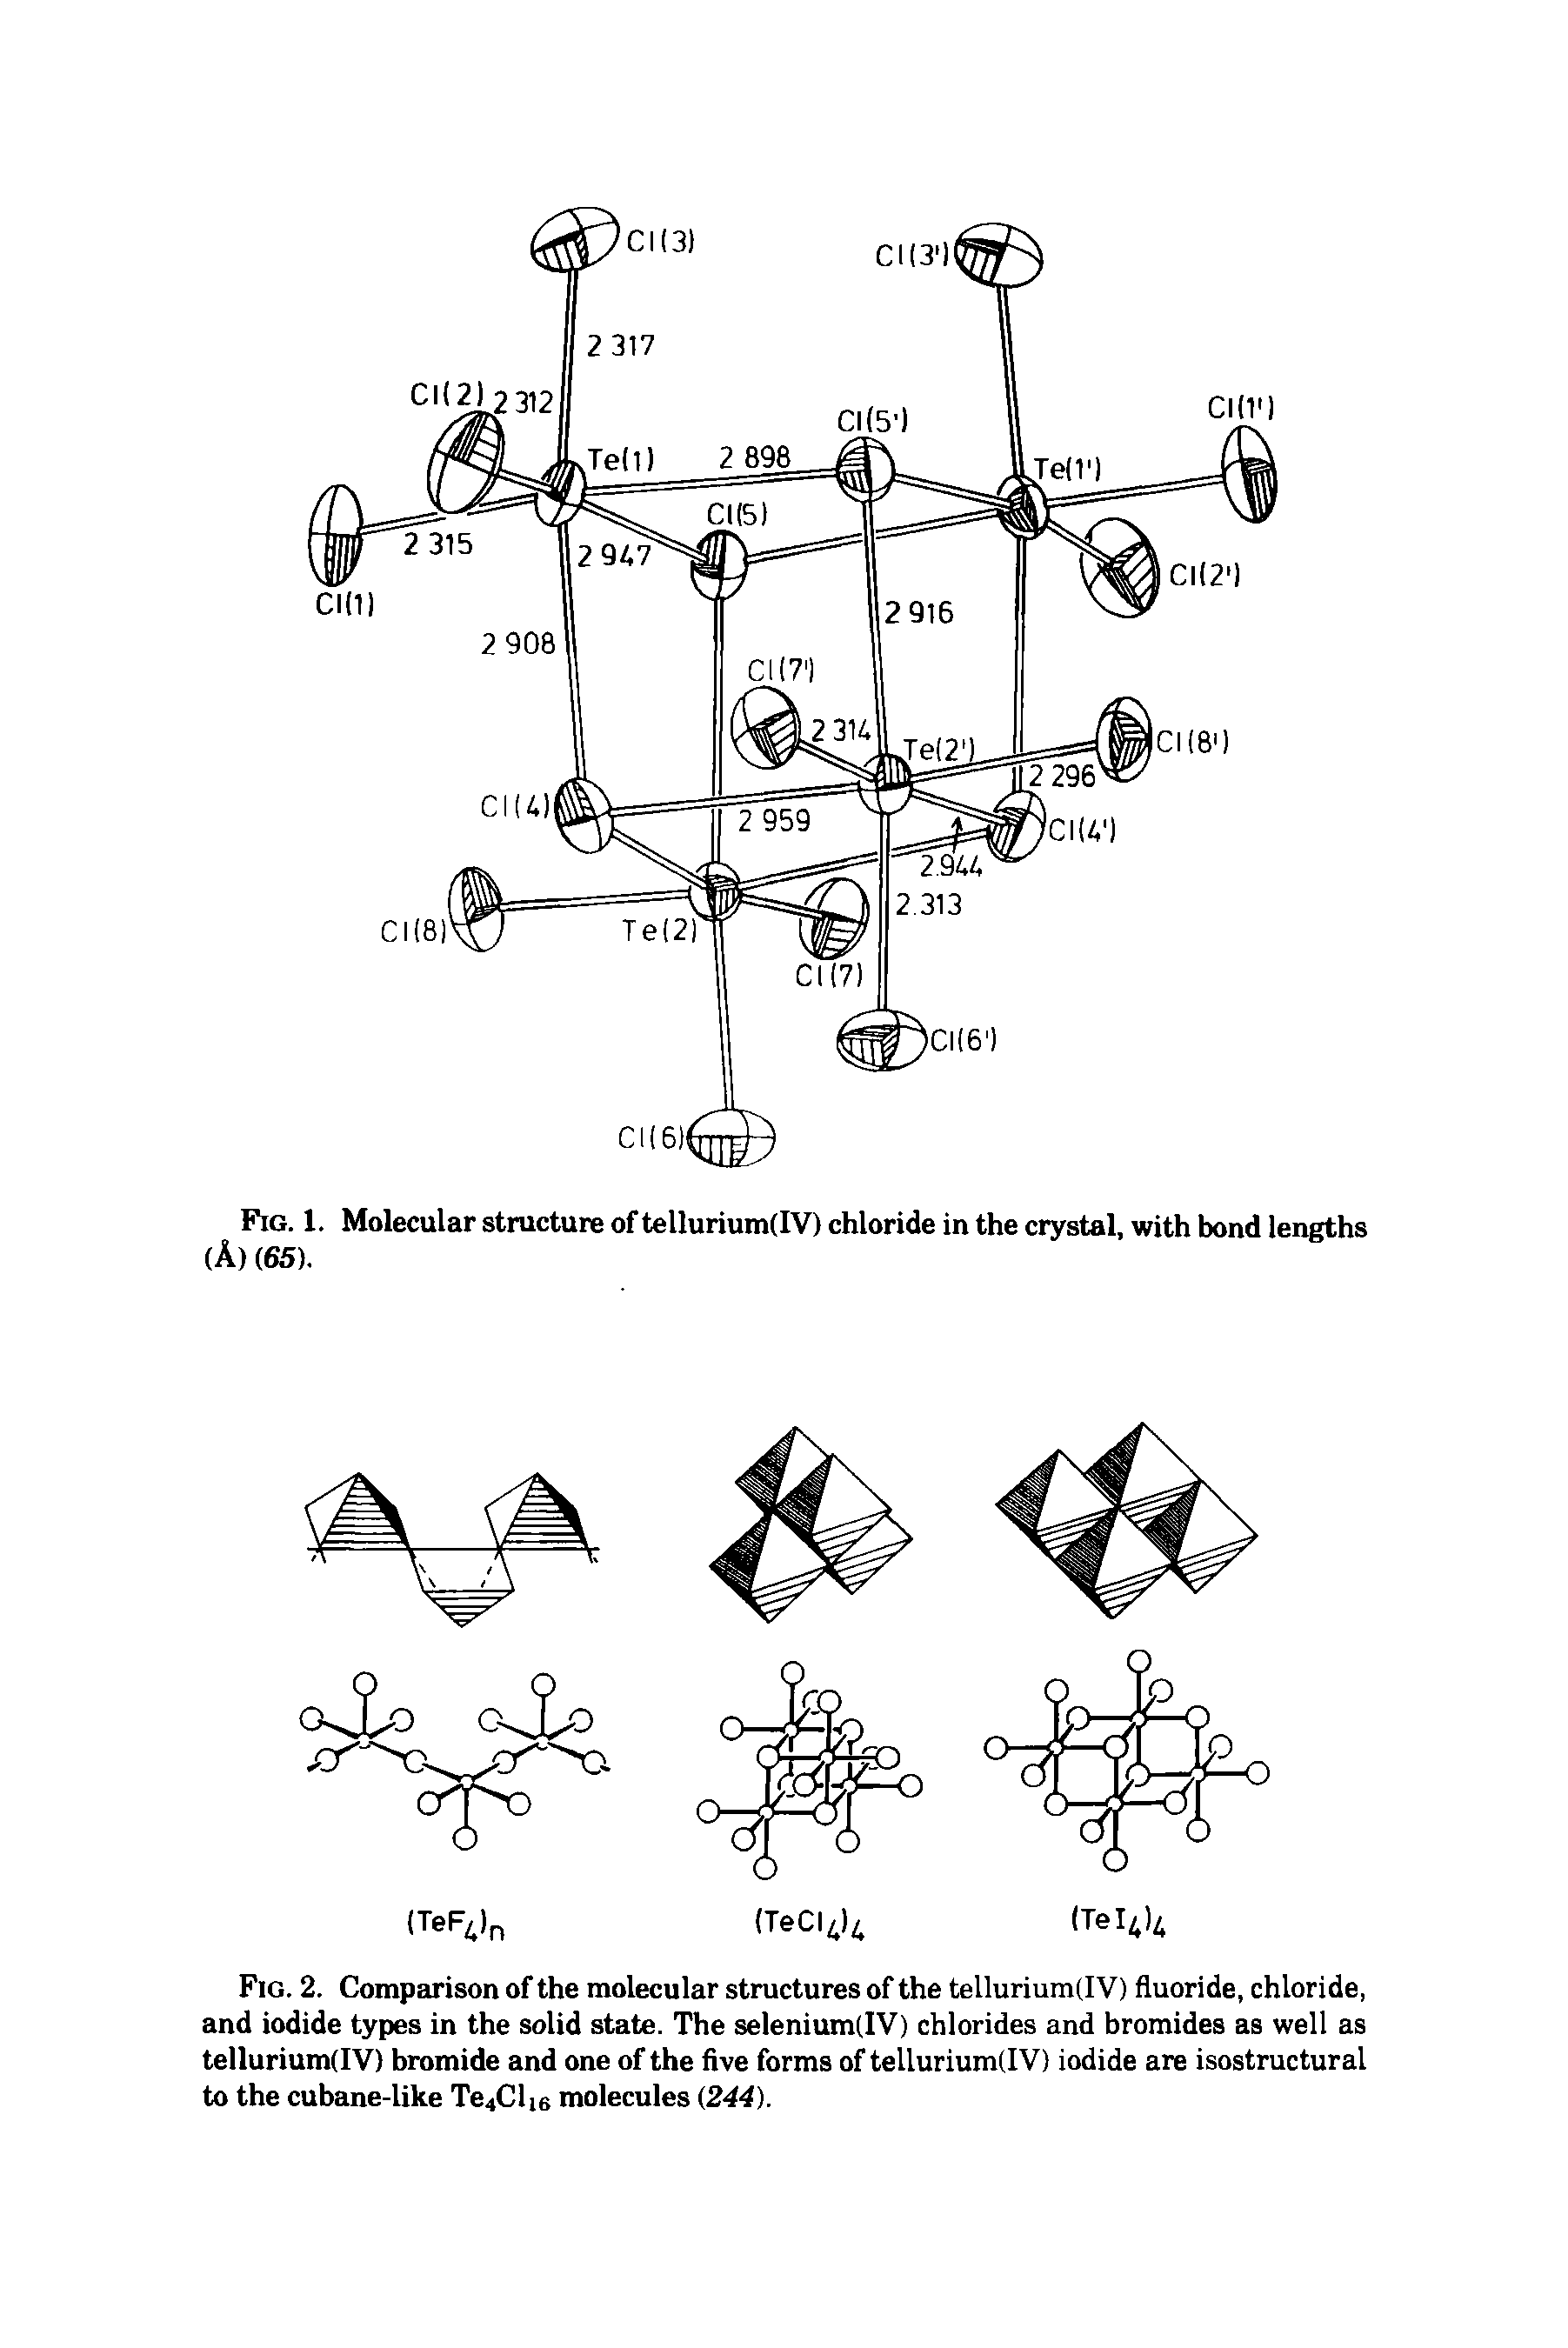 Fig. 2. Comparison of the molecular structures of the tellurium(IV) fluoride, chloride, and iodide types in the solid state. The selenium(IV) chlorides and bromides as well as tellurium(IV) bromide and one of the five forms of tellurium(lV) iodide are isostructural to the cubane-like Te4Cli6 molecules (244).